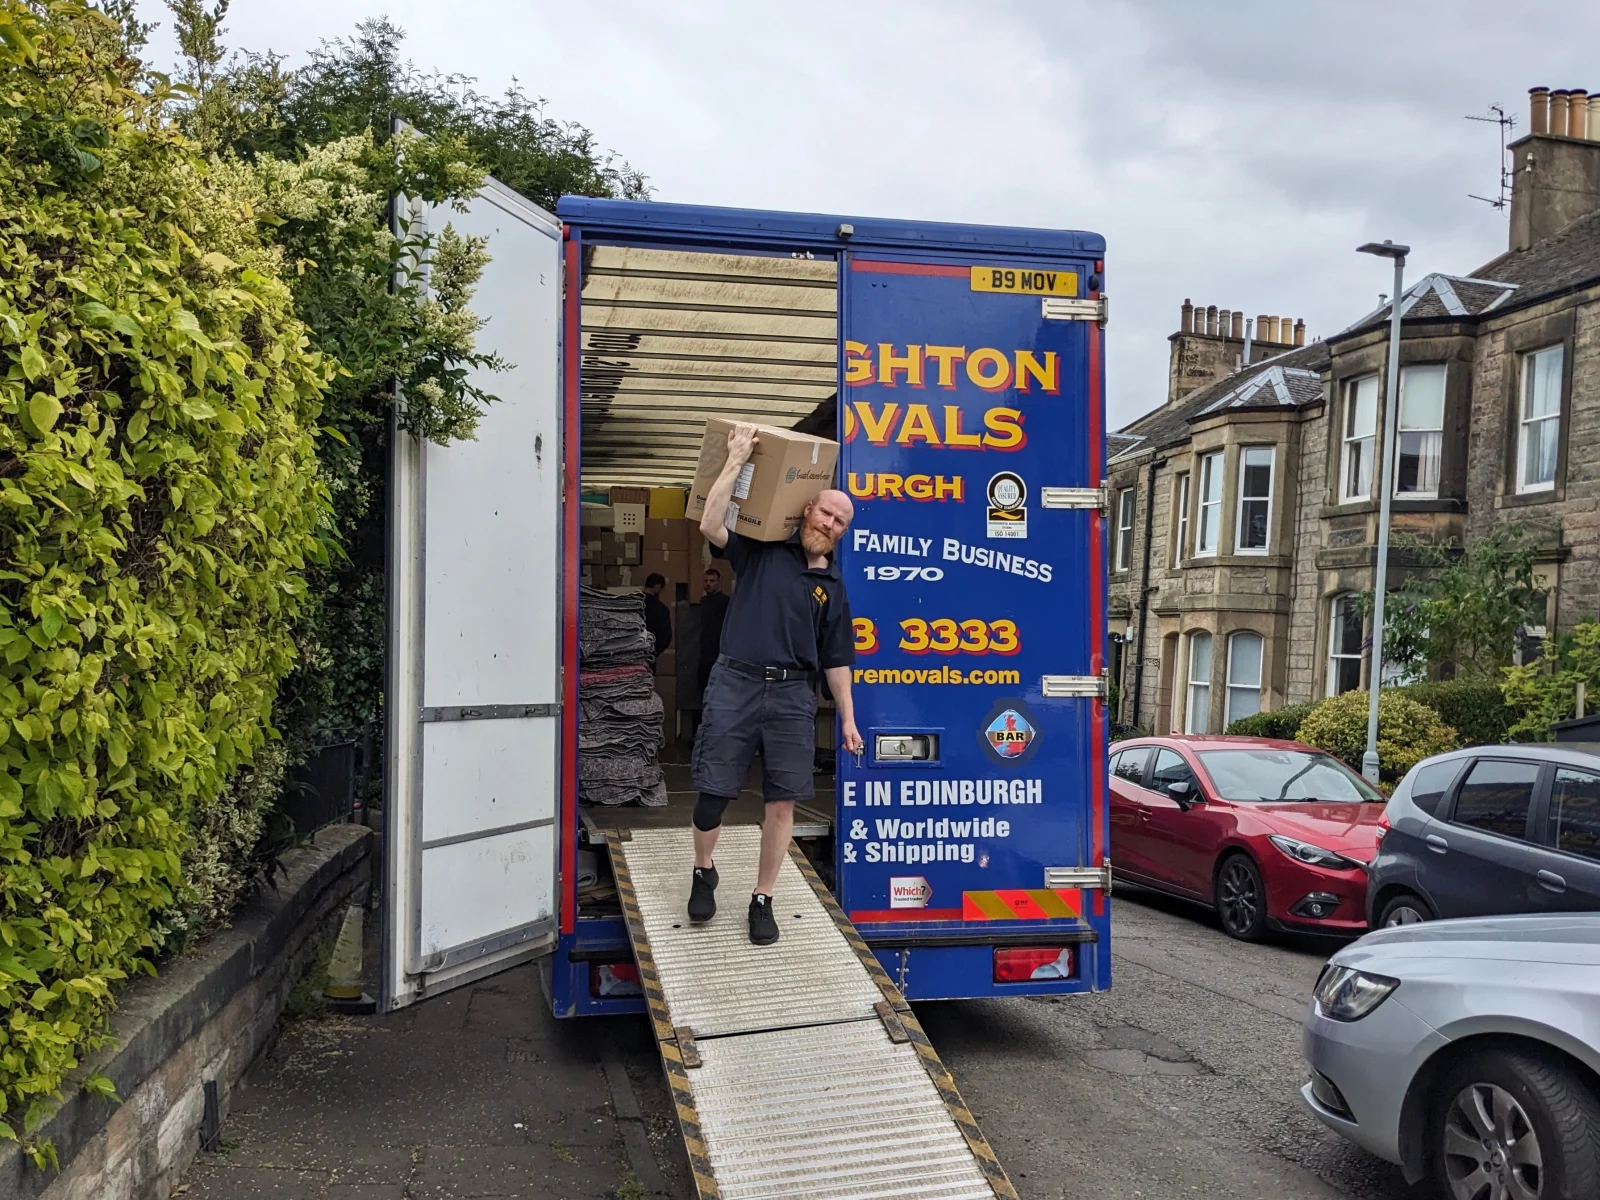 On the move with Broughton Removals. - An article by EGG